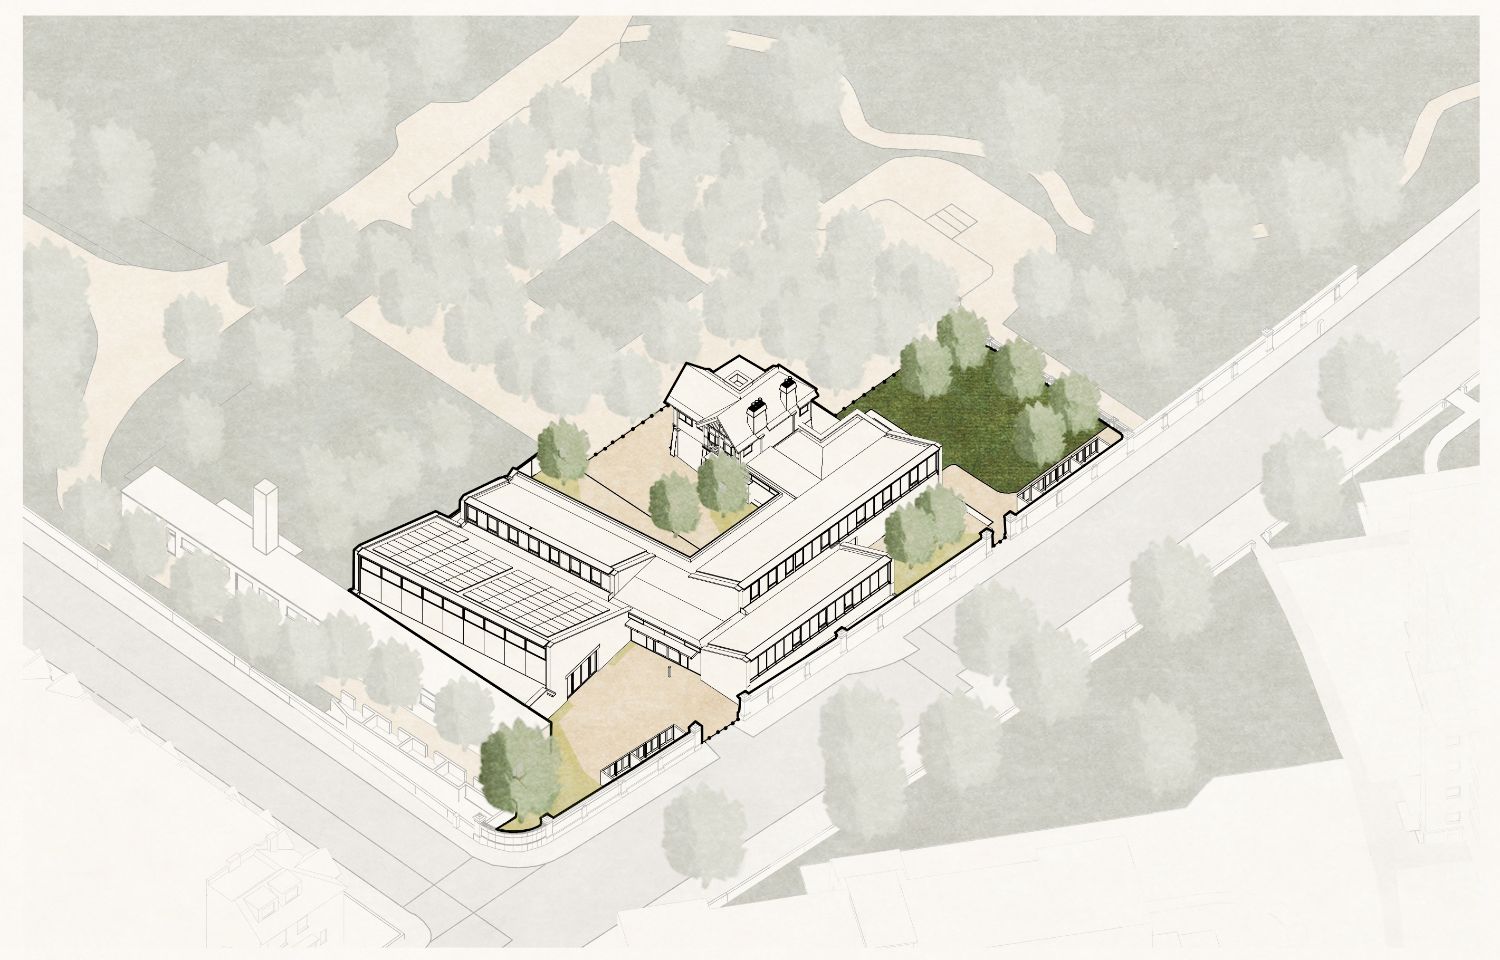 Axo drawing of Sands End Arts & Community Centre